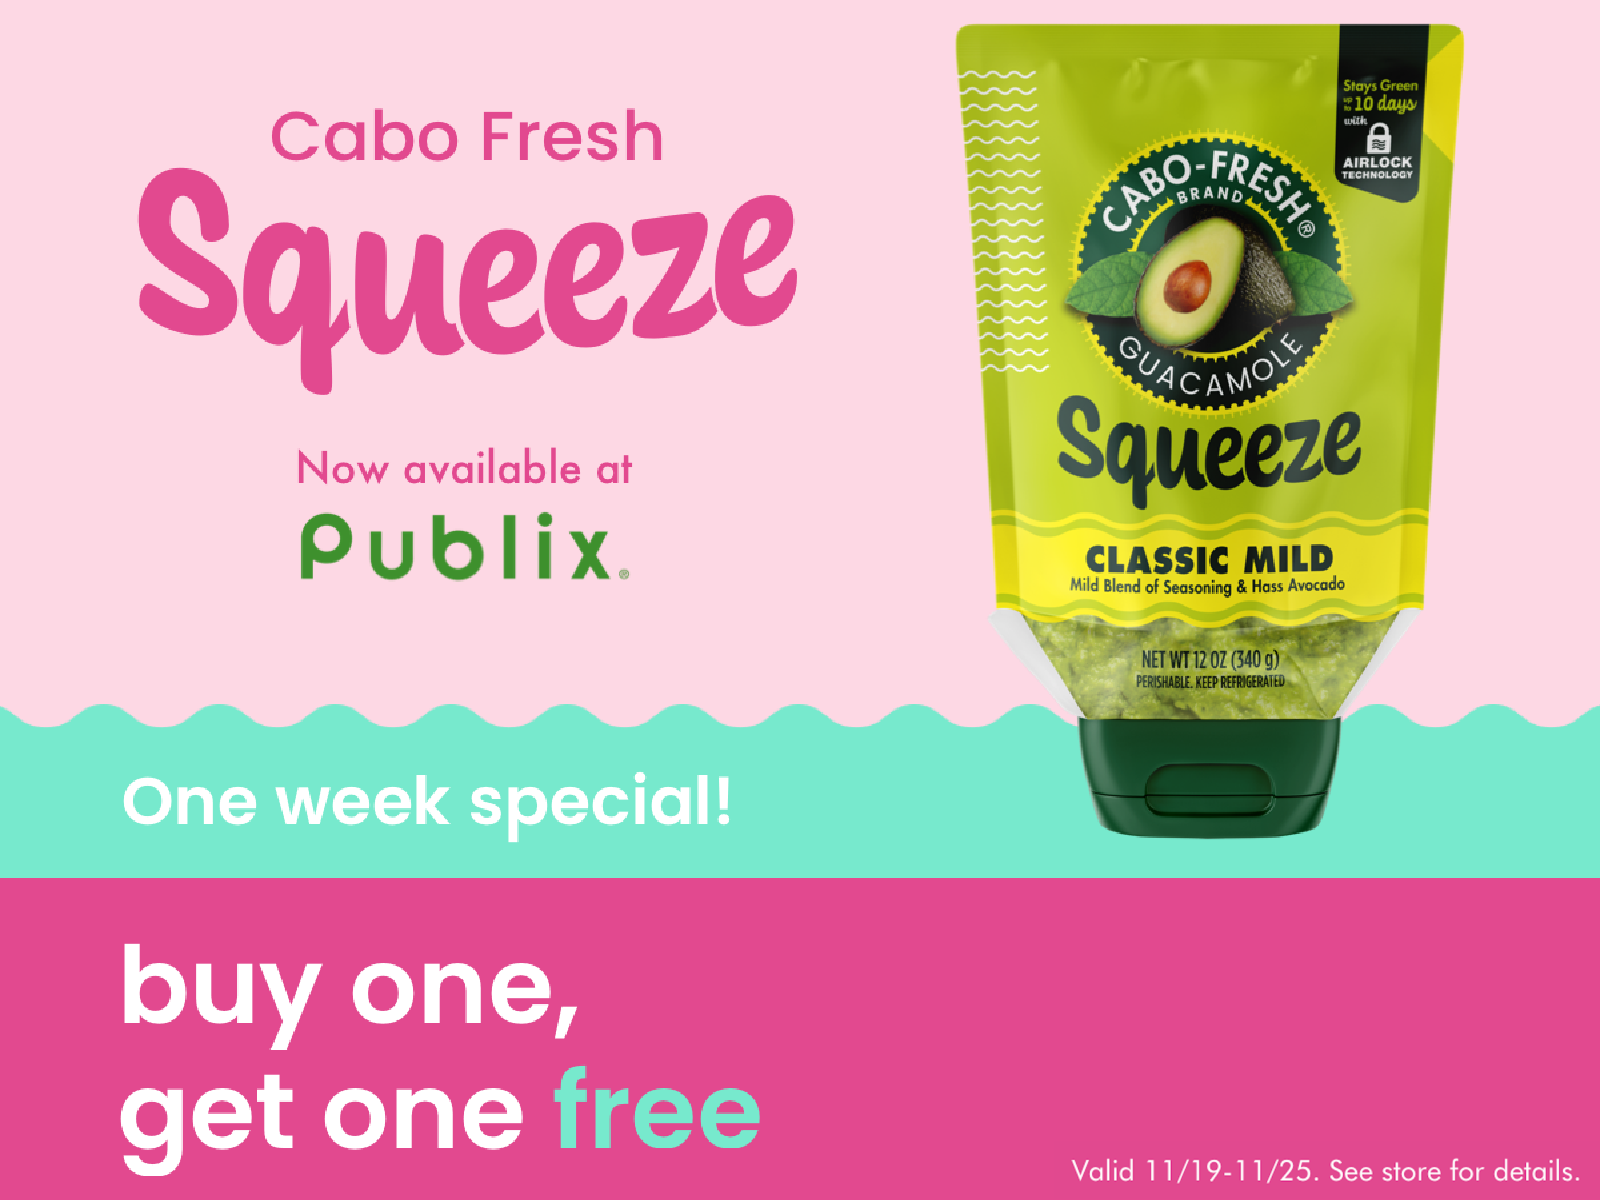 Cabo-Fresh Guacamole Squeeze Stays Green For 10 Days!! Find It At Your Local Publix & Look For The Upcoming BOGO! on I Heart Publix